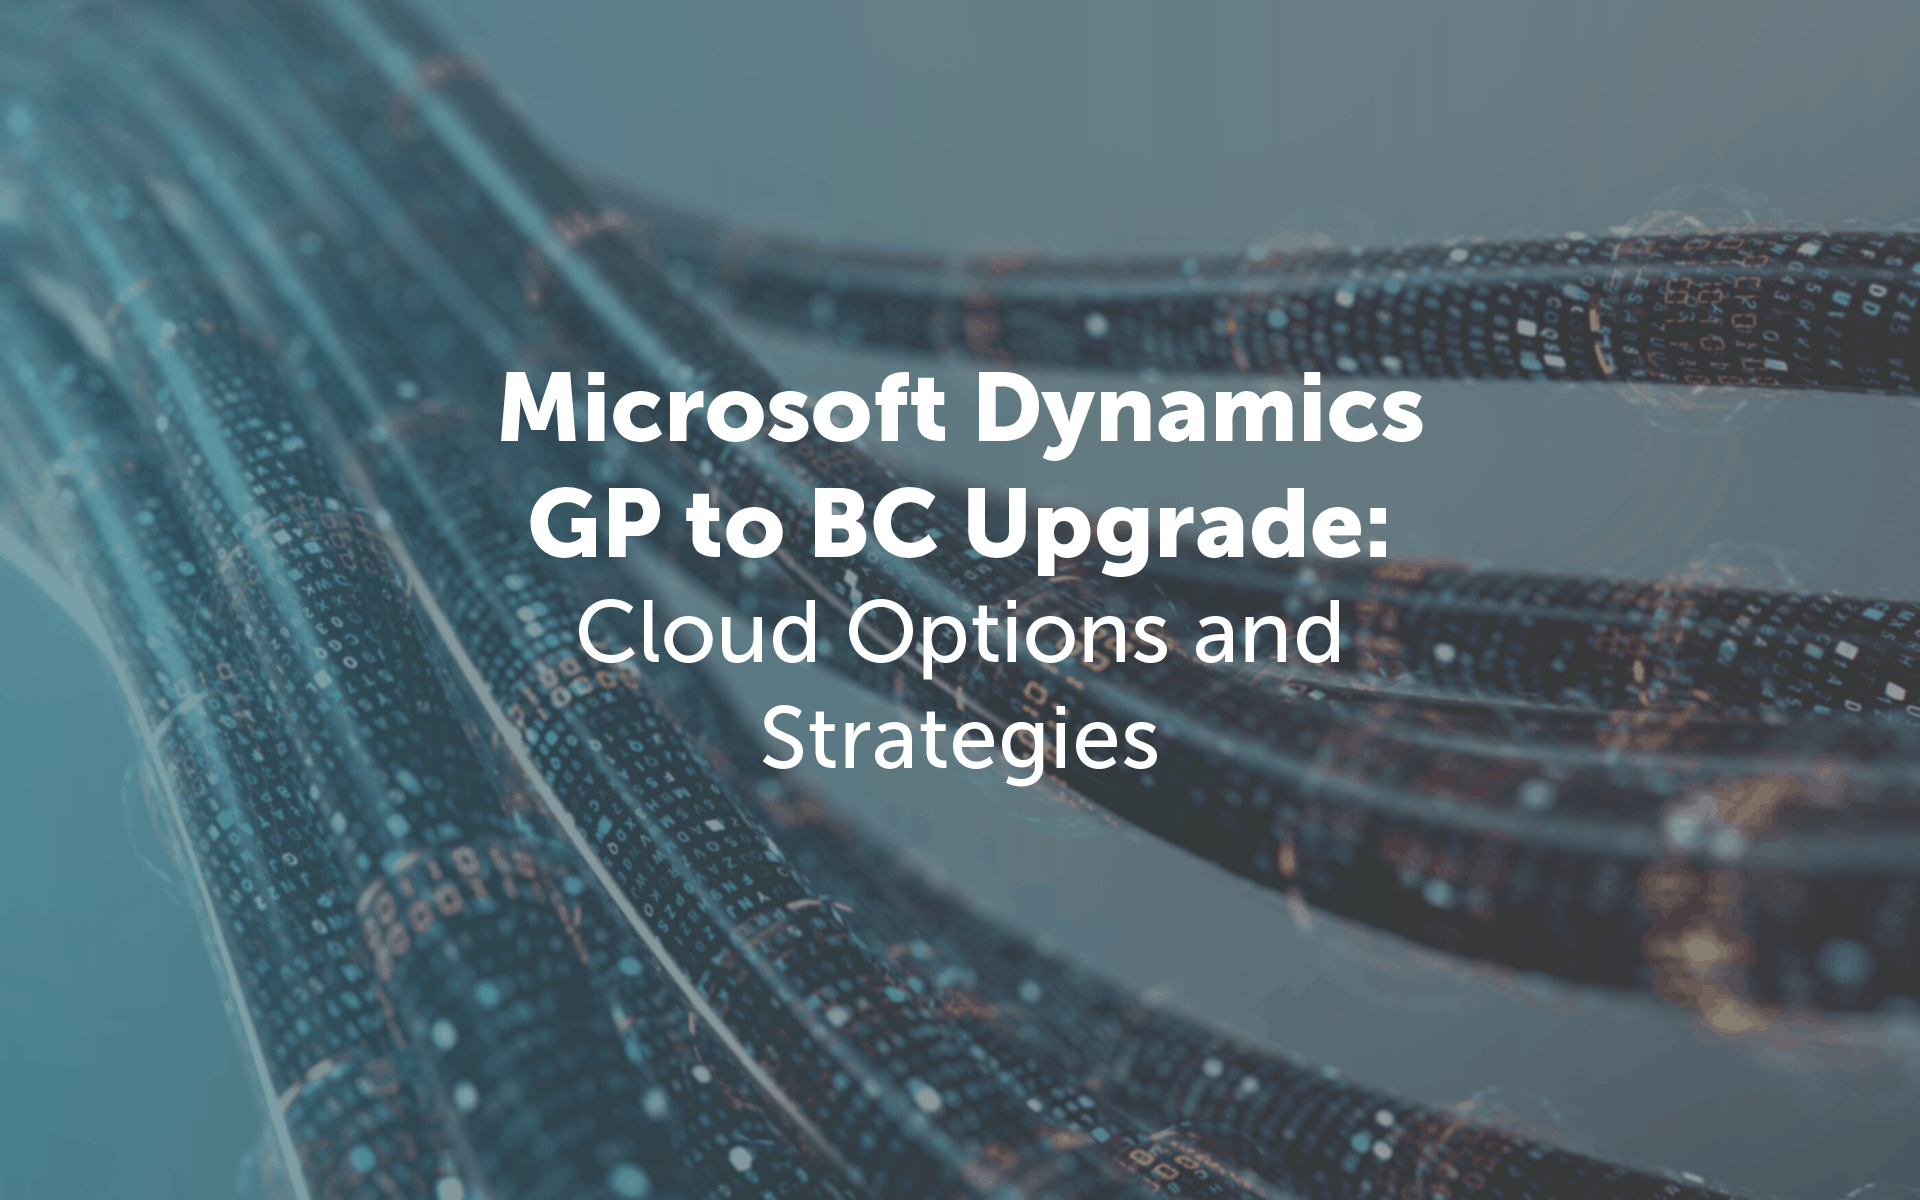 Image of cables over the words "Microsoft Dynamics GP to Dynamics 365 Business Central: Cloud Options and Strategies"